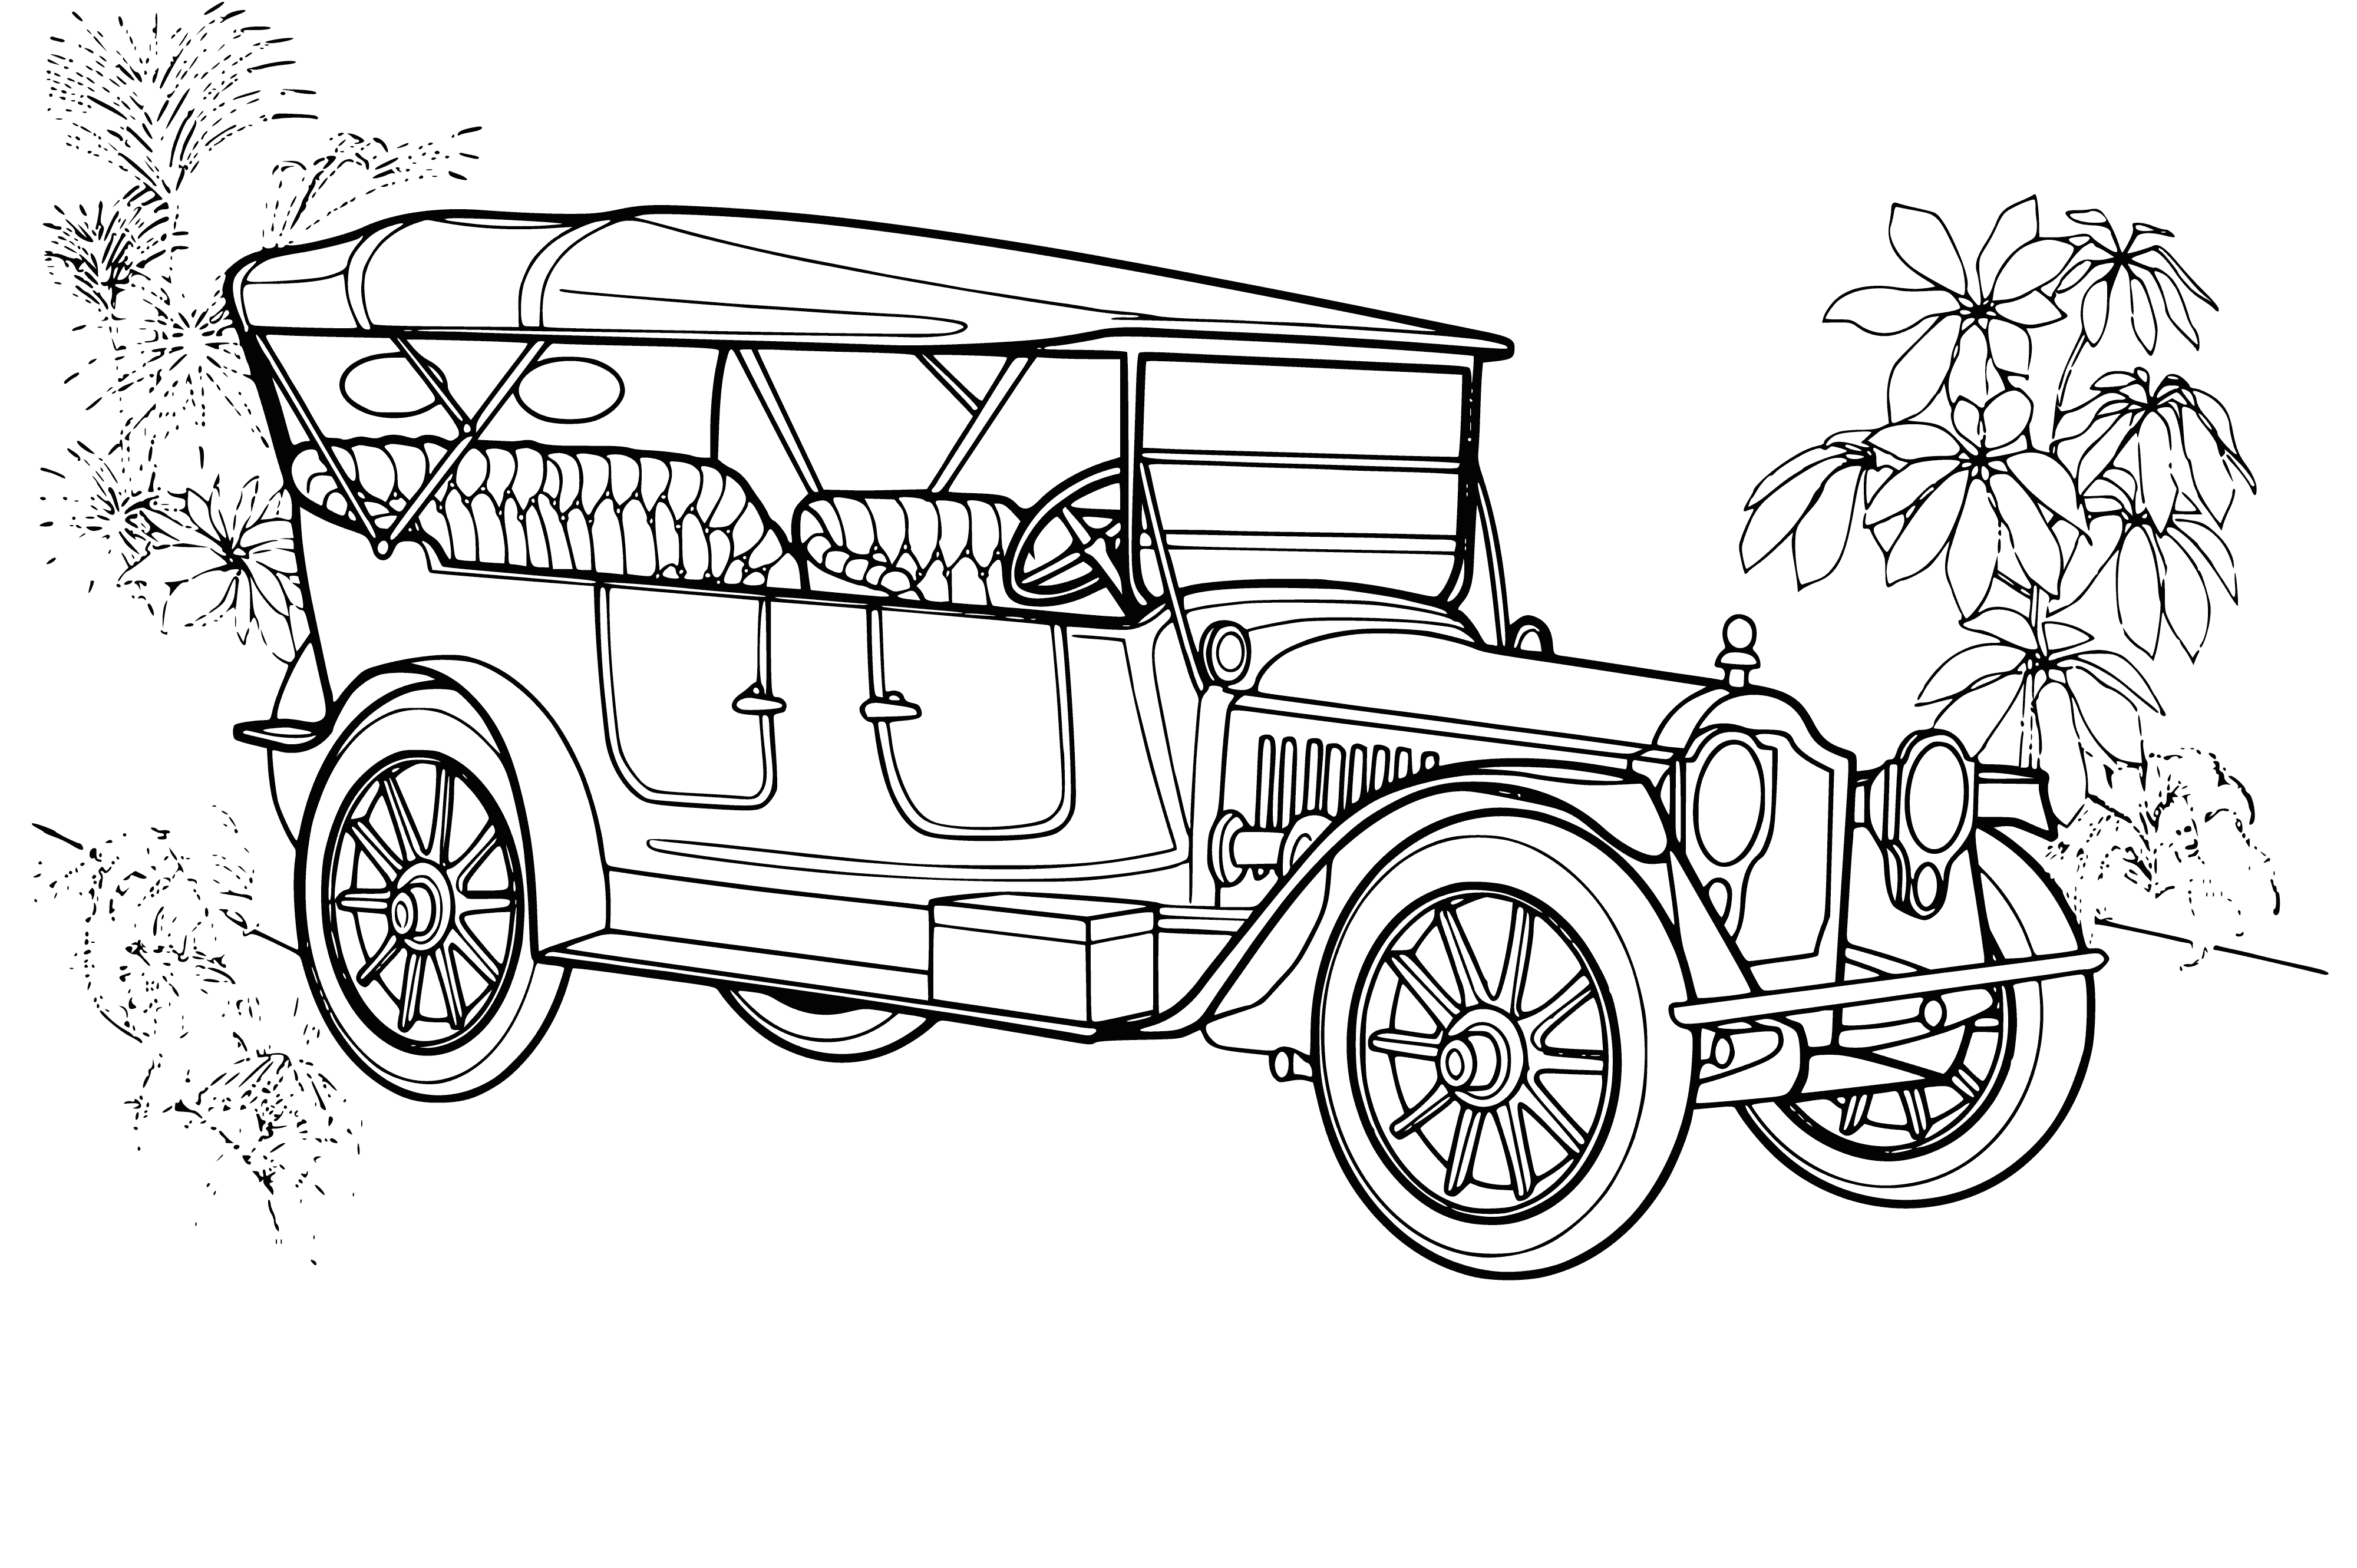 coloring page: Packard Twin Six, early 1900s black car w/ 2 rows of seats, long bonnet, white tires & 2 headlights.